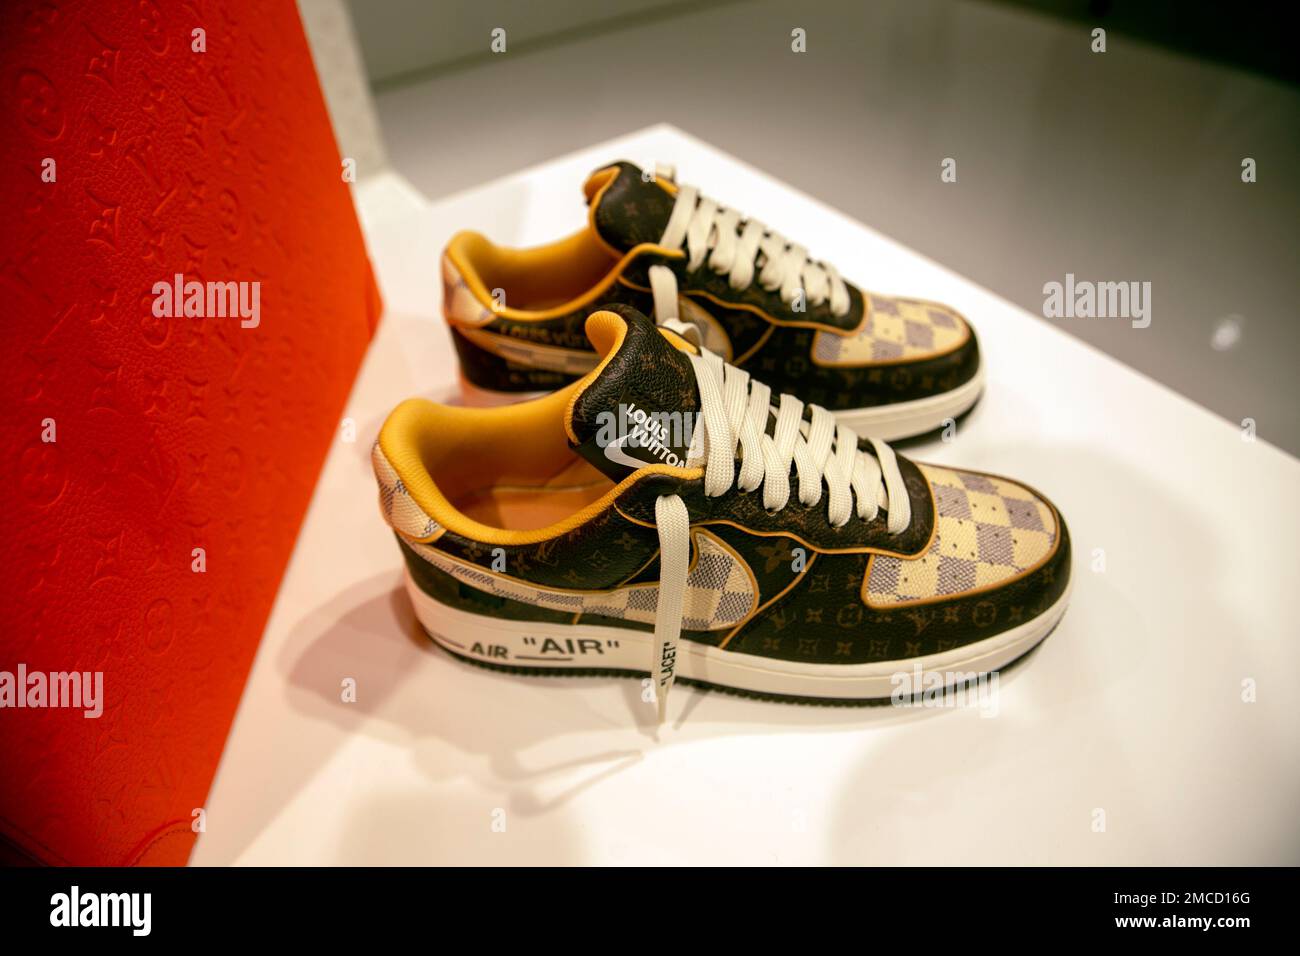 Sotheby's to Auction 200 Pairs of Louis Vuitton x Nike 'Air Force 1'  Sneakers Created by Virgil Abloh